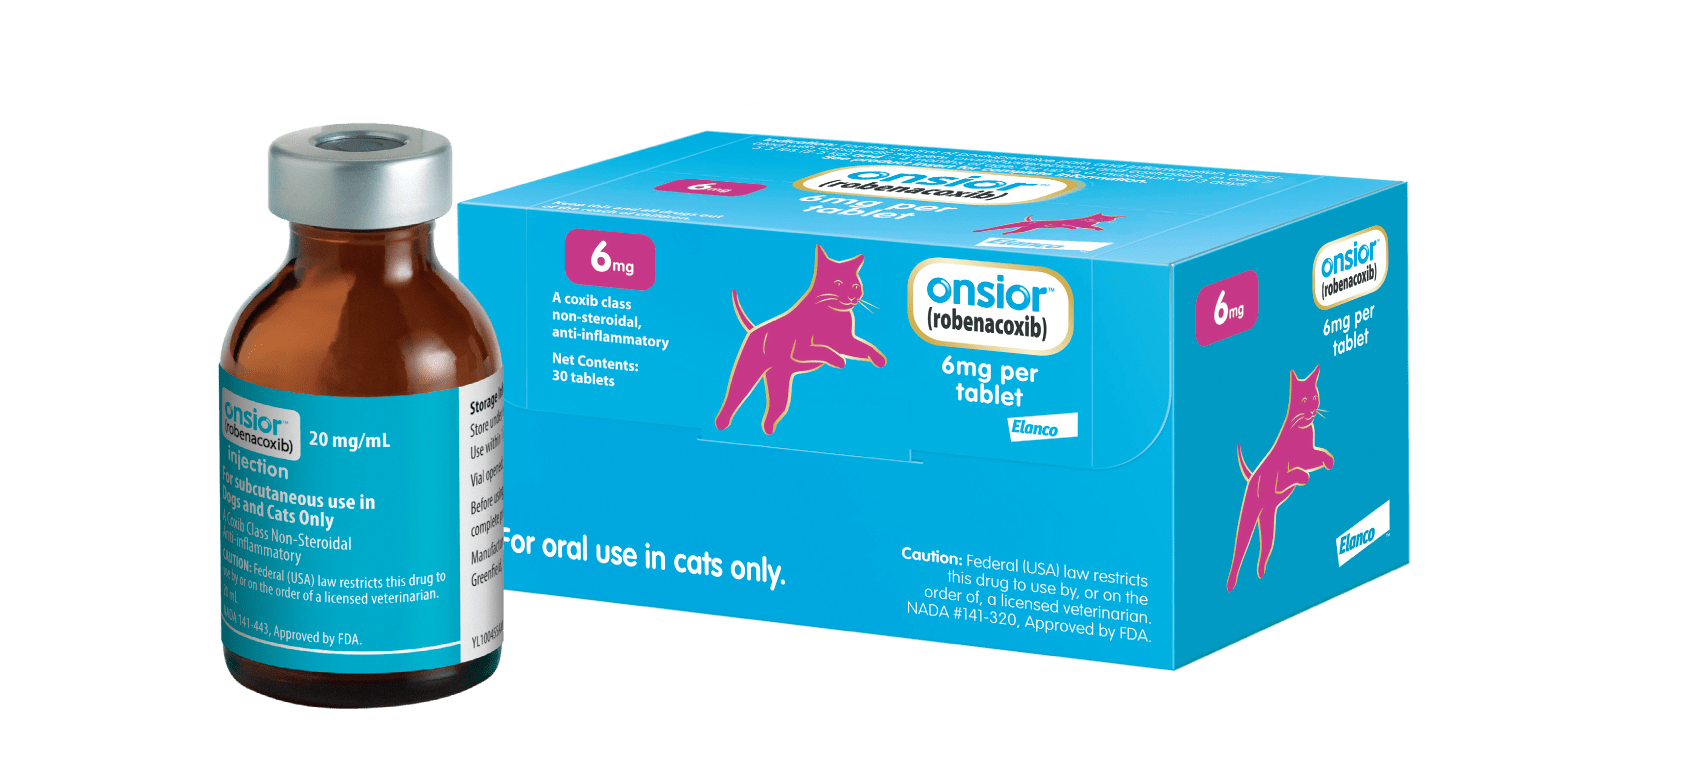 Onsior tablets and inject